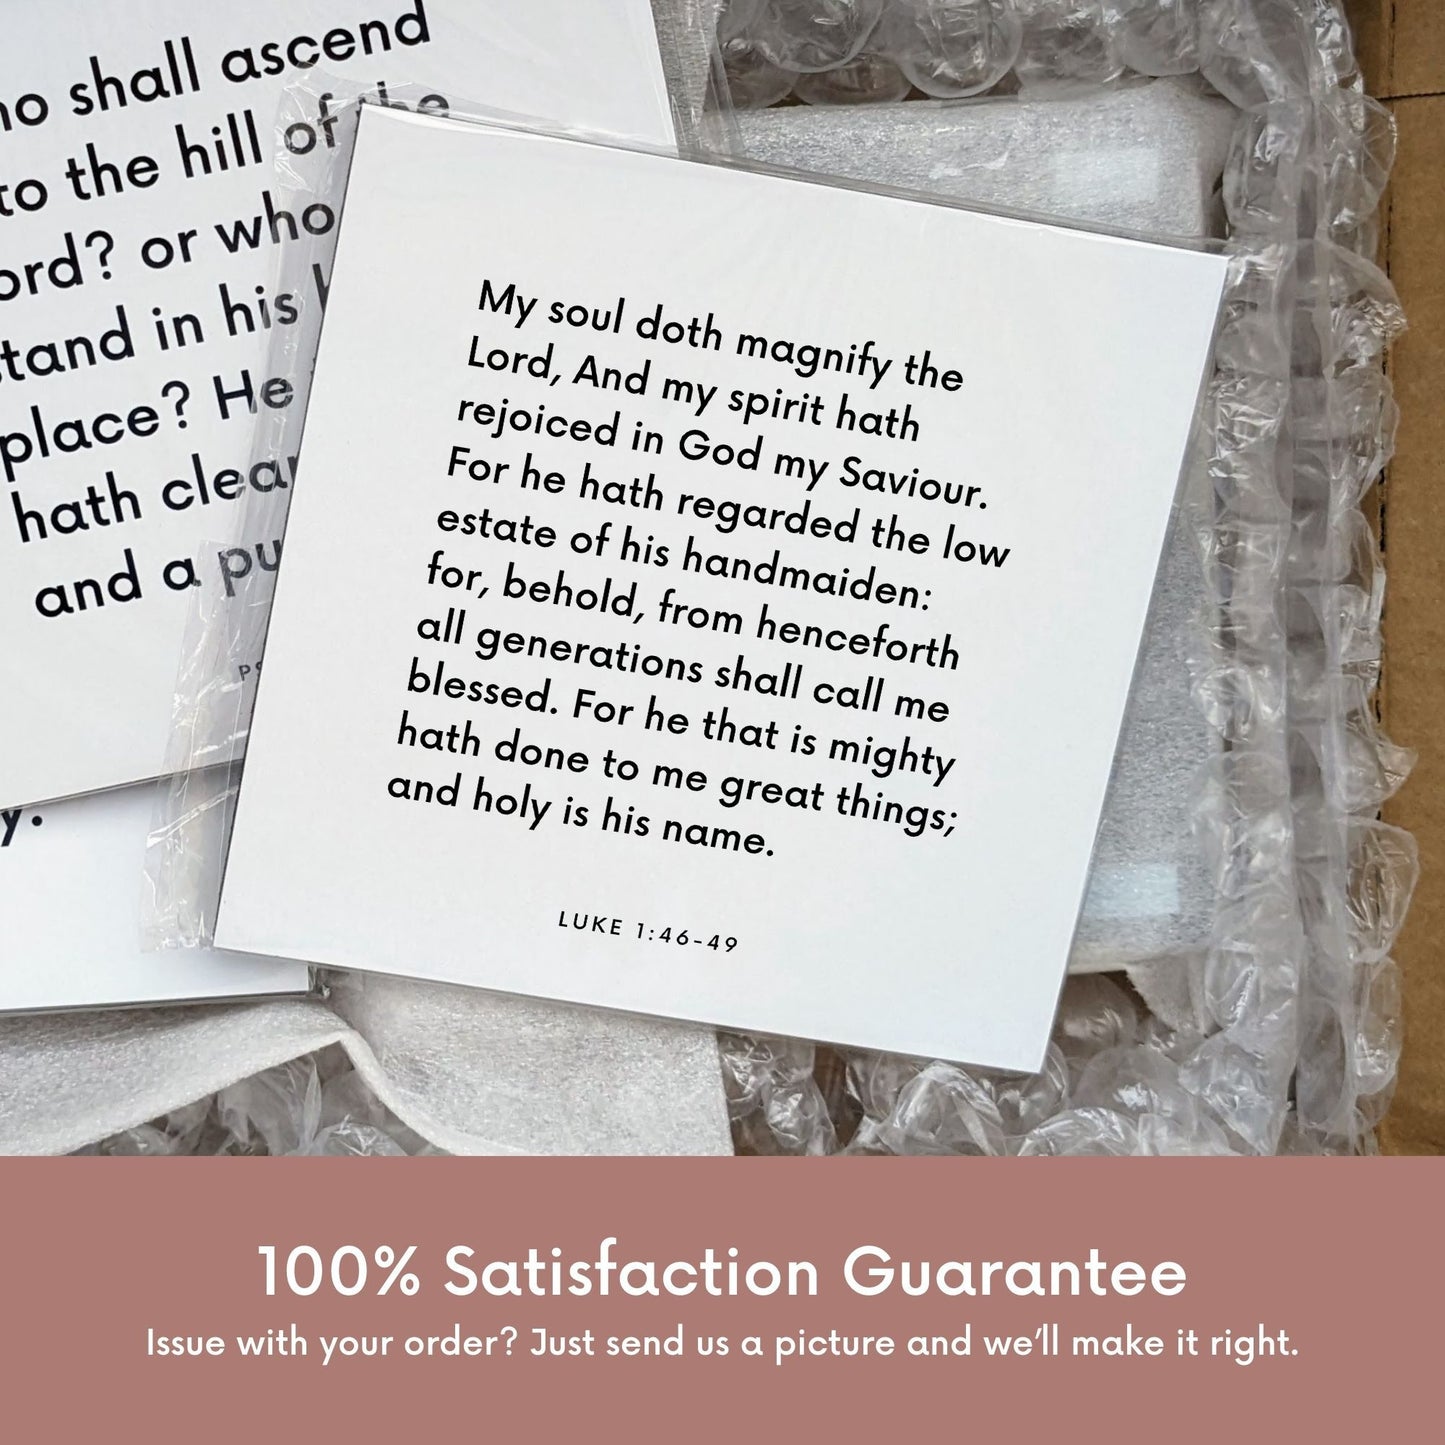 Shipping materials for scripture tile of Luke 1:46-49 - "My soul doth magnify the Lord"